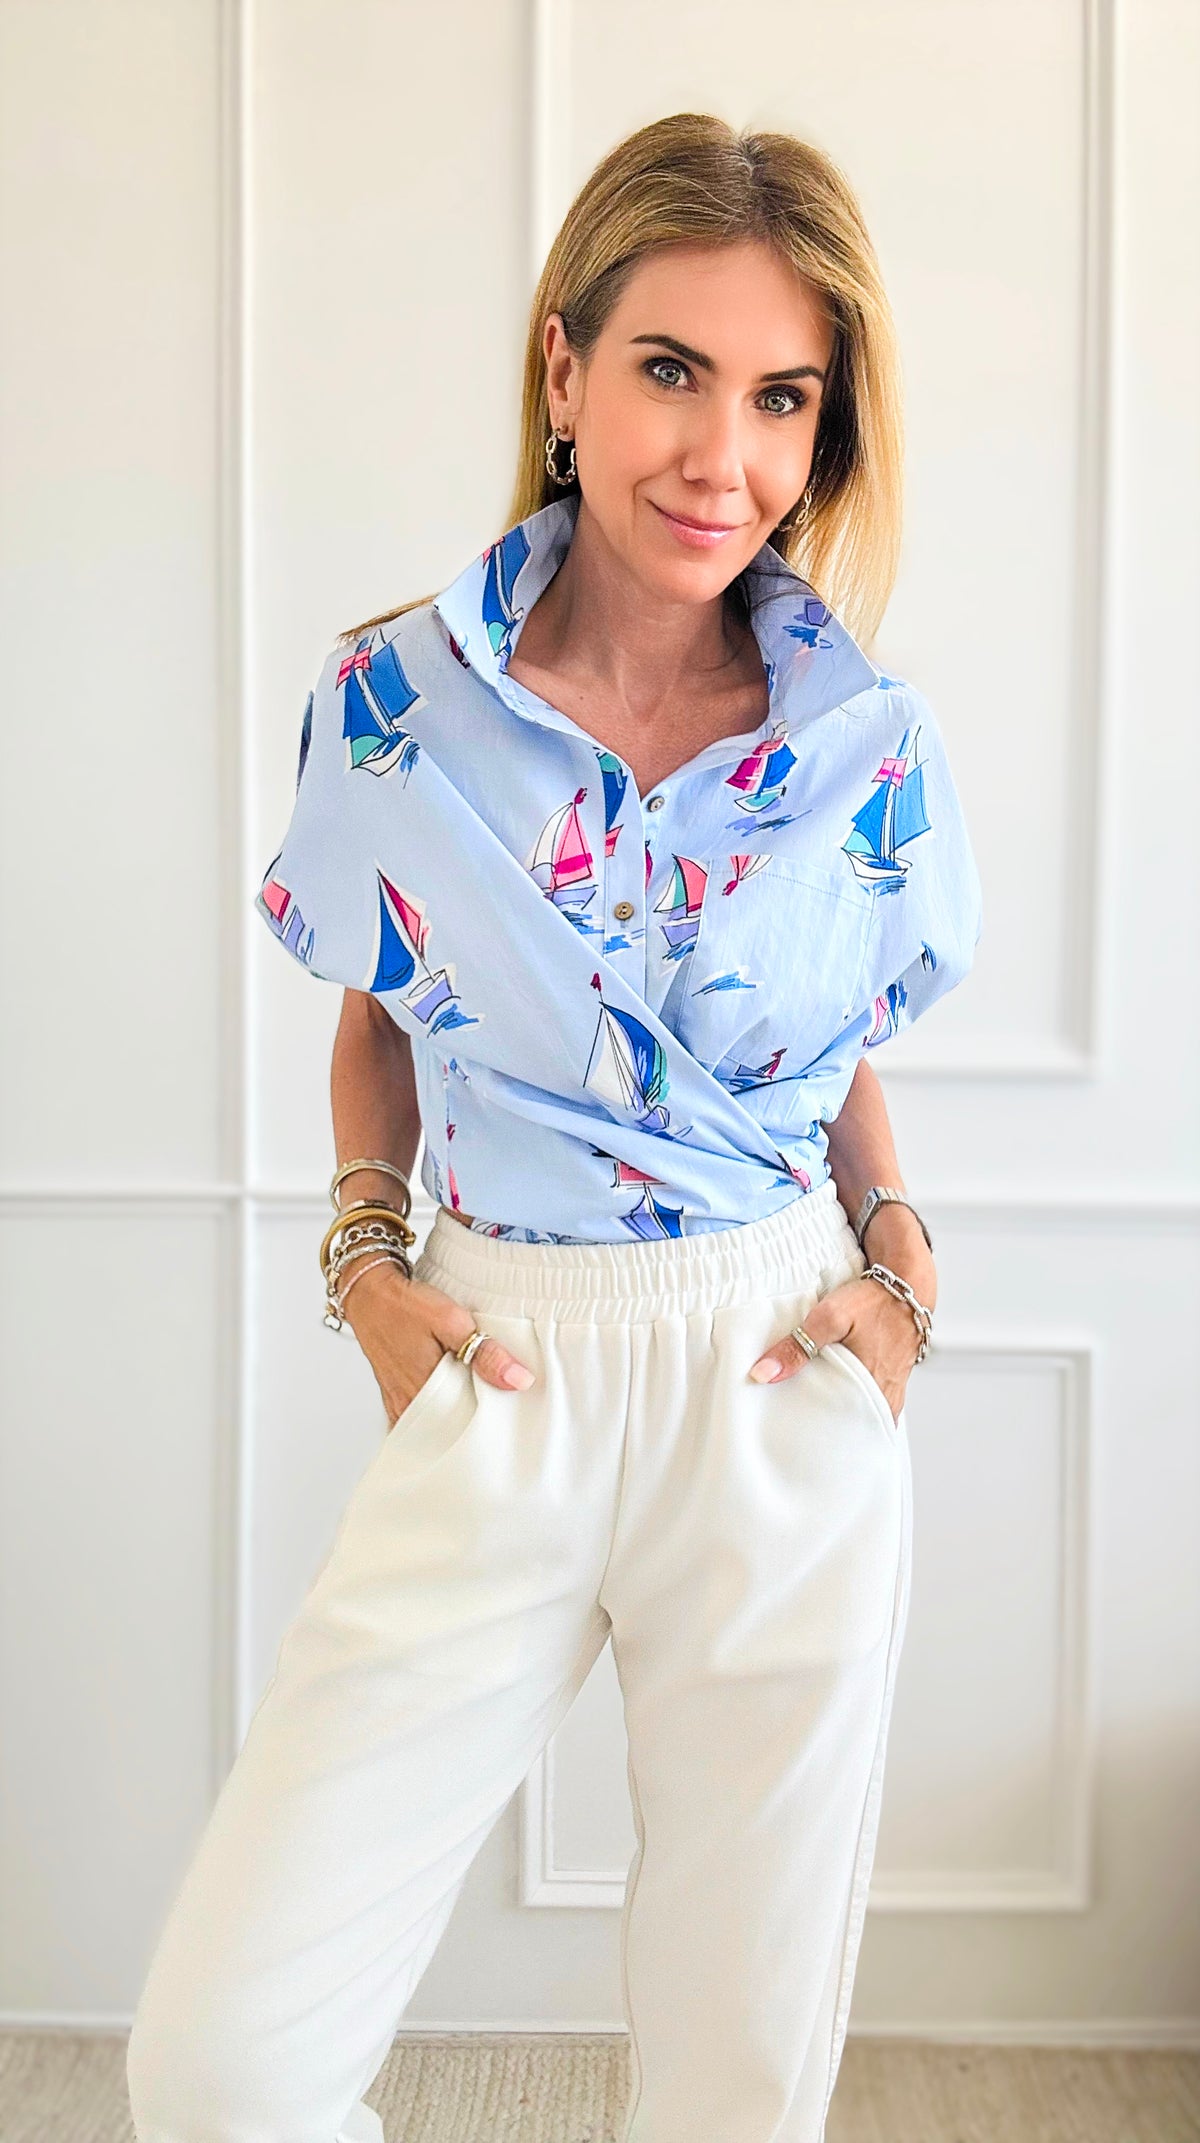 Marine Sailboat Print Top - Light Blue-110 Short Sleeve Tops-Easel-Coastal Bloom Boutique, find the trendiest versions of the popular styles and looks Located in Indialantic, FL